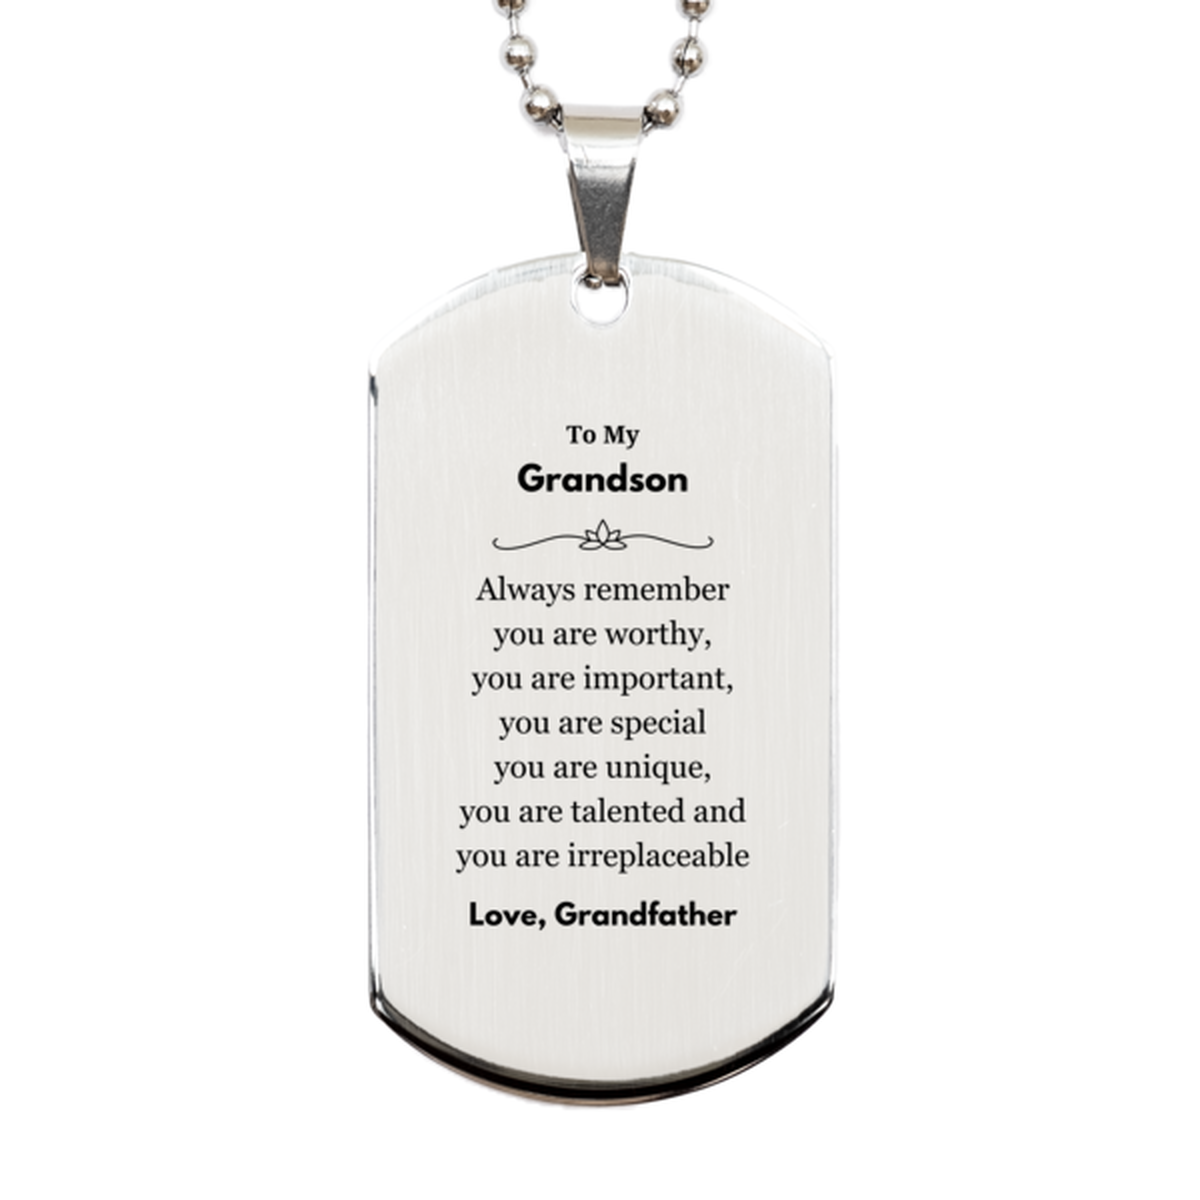 Grandson Birthday Gifts from Grandfather, Inspirational Silver Dog Tag for Grandson Christmas Graduation Gifts for Grandson Always remember you are worthy, you are important. Love, Grandfather